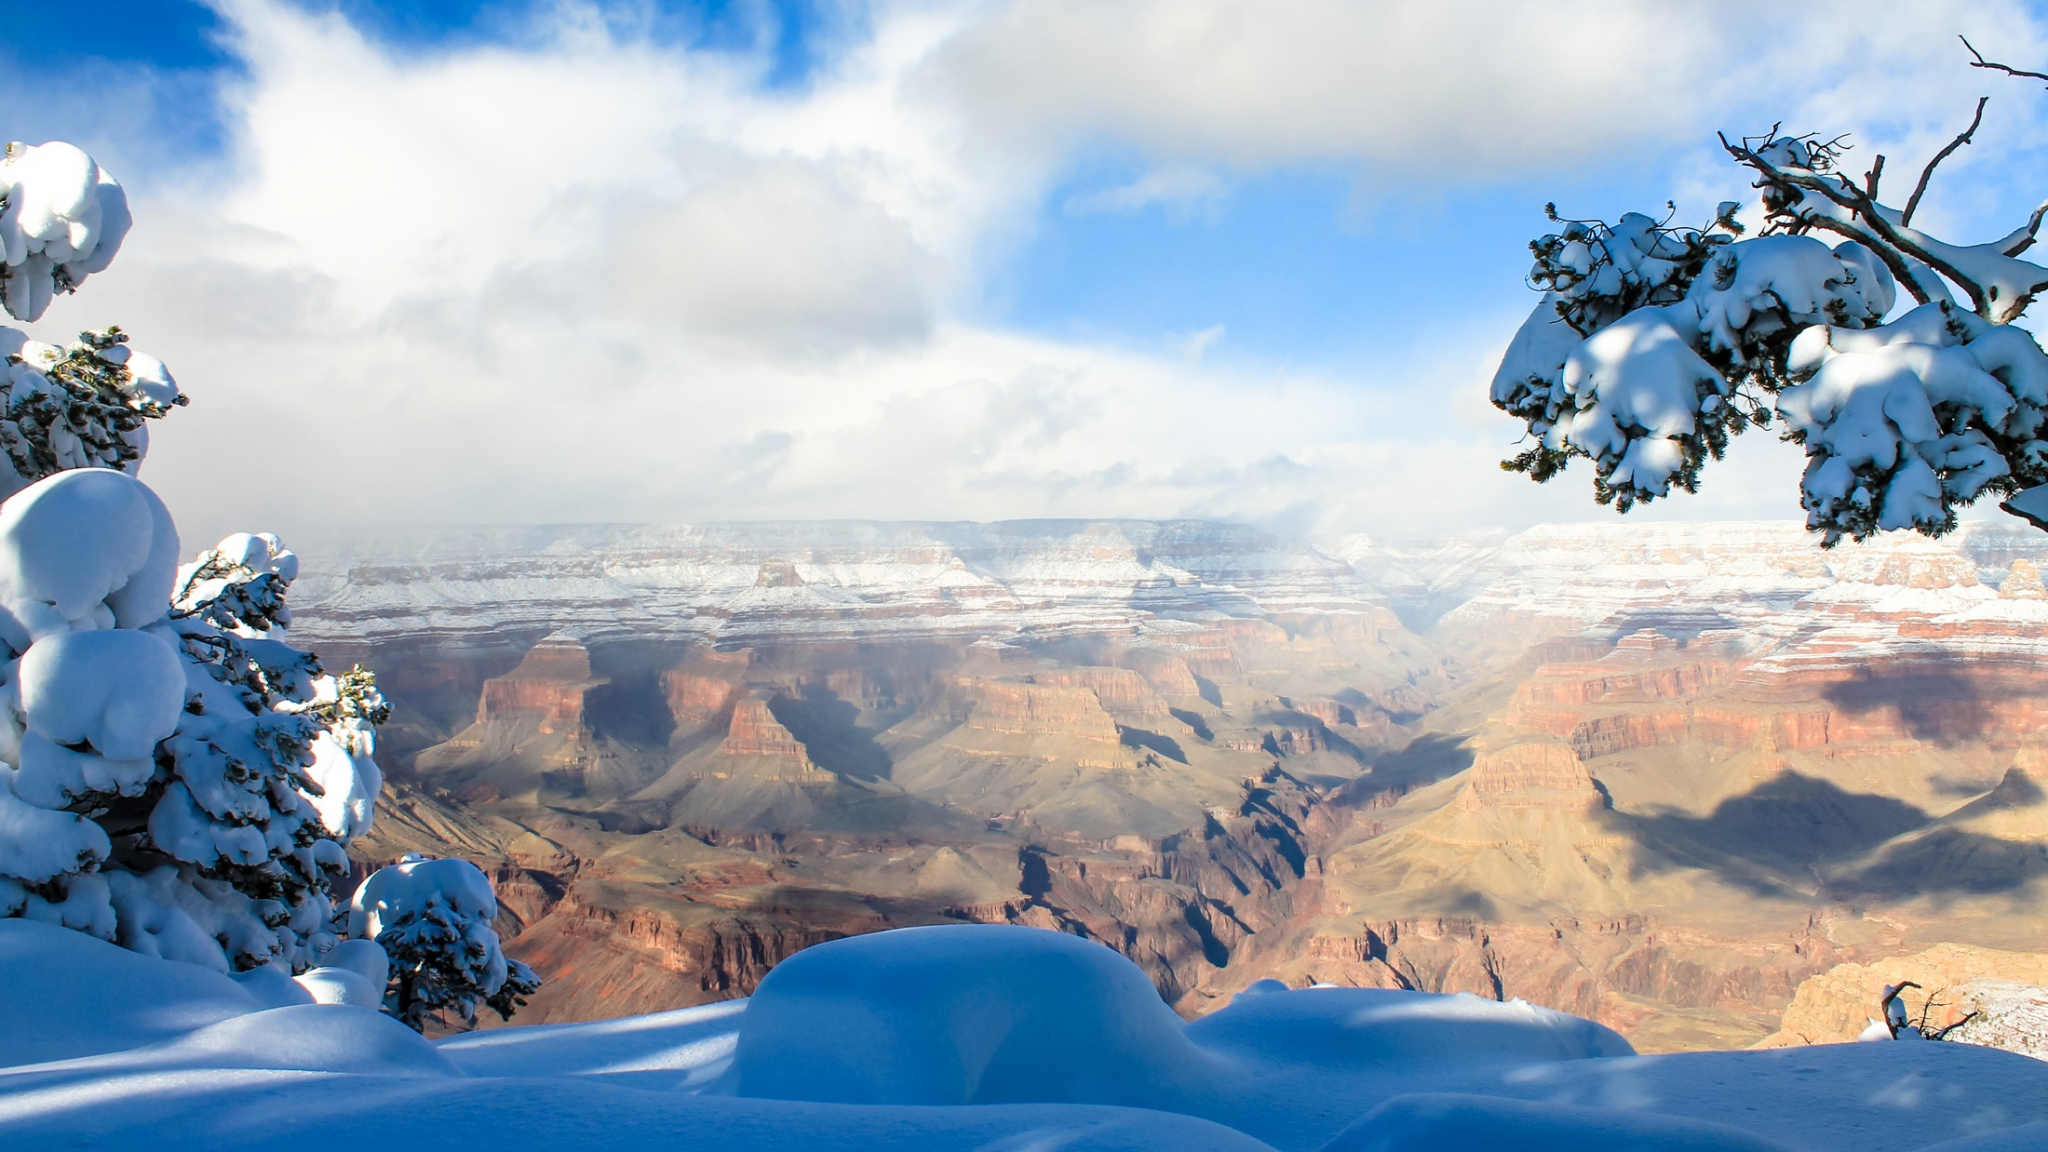 Desktop Wallpaper Grand Canyon, Winter, Snow, HD Image, Picture, Background, Nfy9g0